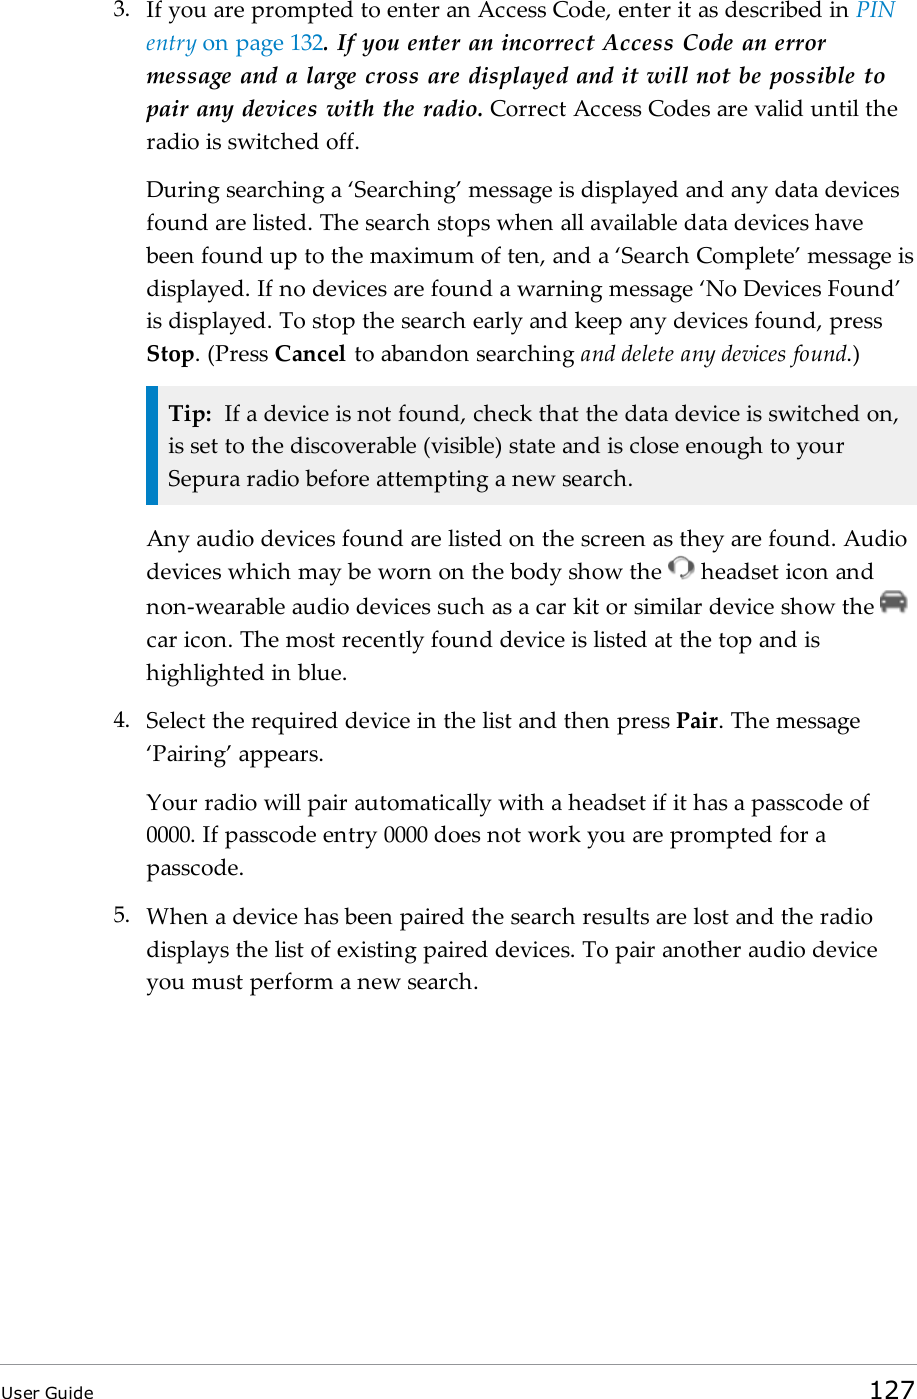 3. If you are prompted to enter an Access Code, enter it as described in PINentry on page 132. If you enter an incorrect Access Code an errormessage and a large cross are displayed and it will not be possible topair any devices with the radio. Correct Access Codes are valid until theradio is switched off.During searching a ‘Searching’ message is displayed and any data devicesfound are listed. The search stops when all available data devices havebeen found up to the maximum of ten, and a ‘Search Complete’ message isdisplayed. If no devices are found a warning message ‘No Devices Found’is displayed. To stop the search early and keep any devices found, pressStop. (Press Cancel to abandon searching and delete any devices found.)Tip: If a device is not found, check that the data device is switched on,is set to the discoverable (visible) state and is close enough to yourSepura radio before attempting a new search.Any audio devices found are listed on the screen as they are found. Audiodevices which may be worn on the body show the headset icon andnon-wearable audio devices such as a car kit or similar device show thecar icon. The most recently found device is listed at the top and ishighlighted in blue.4. Select the required device in the list and then press Pair. The message‘Pairing’ appears.Your radio will pair automatically with a headset if it has a passcode of0000. If passcode entry 0000 does not work you are prompted for apasscode.5. When a device has been paired the search results are lost and the radiodisplays the list of existing paired devices. To pair another audio deviceyou must perform a new search.User Guide 127